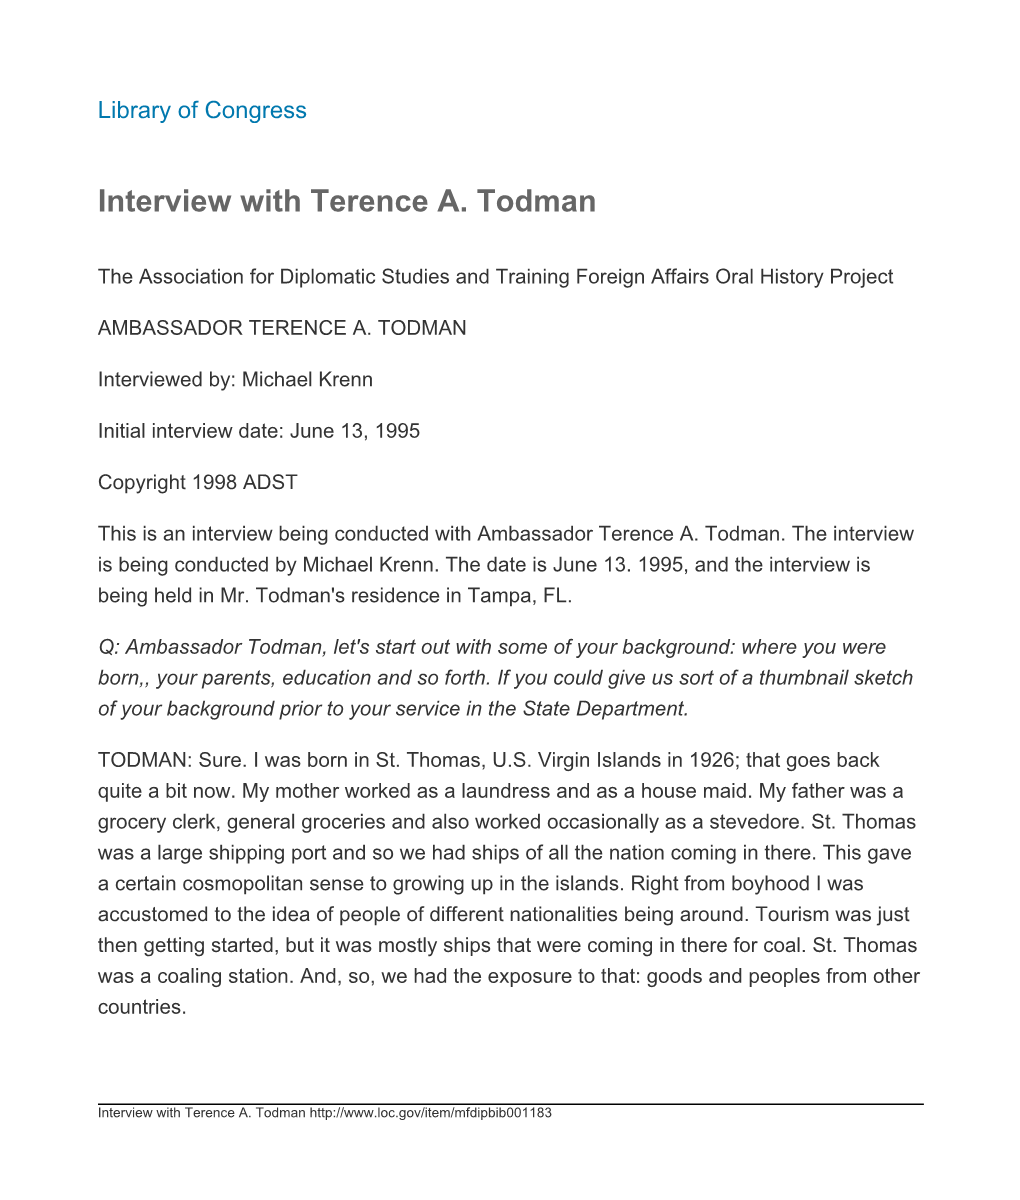 Interview with Terence A. Todman